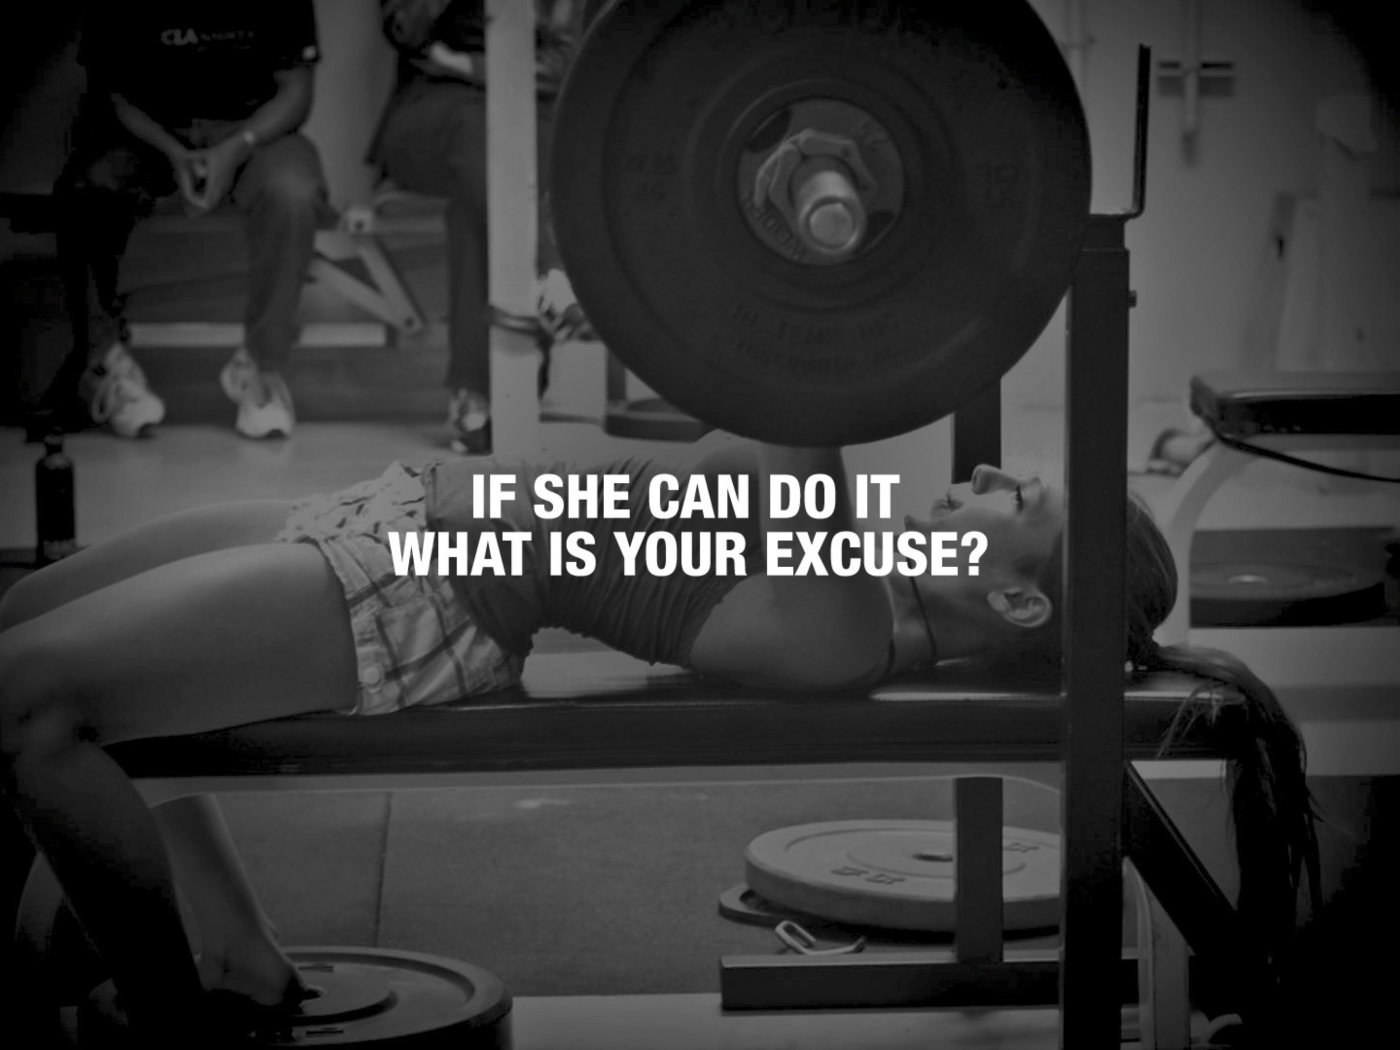 Das If She Can Do It What Is Your Excuse? Wallpaper 1400x1050